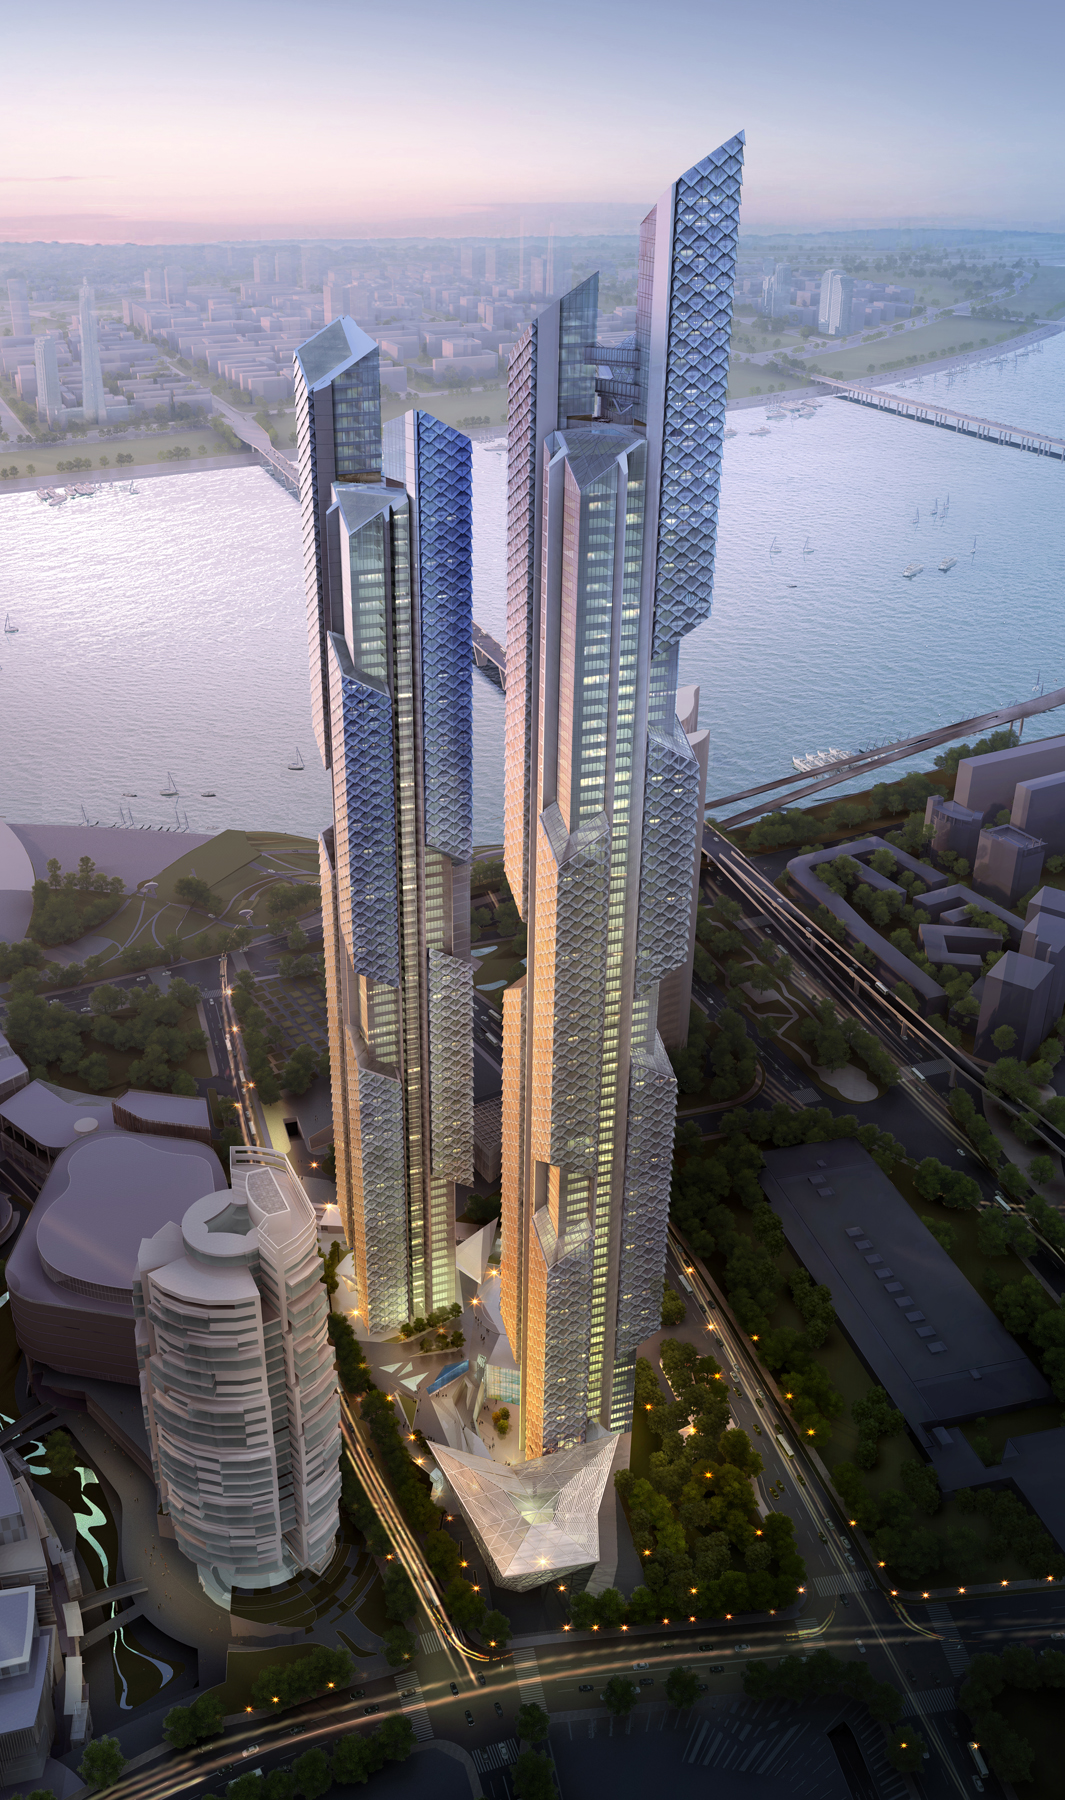 Towers 1 and 2about 450 meters and 390 meters tall, respectivelyshare an archi